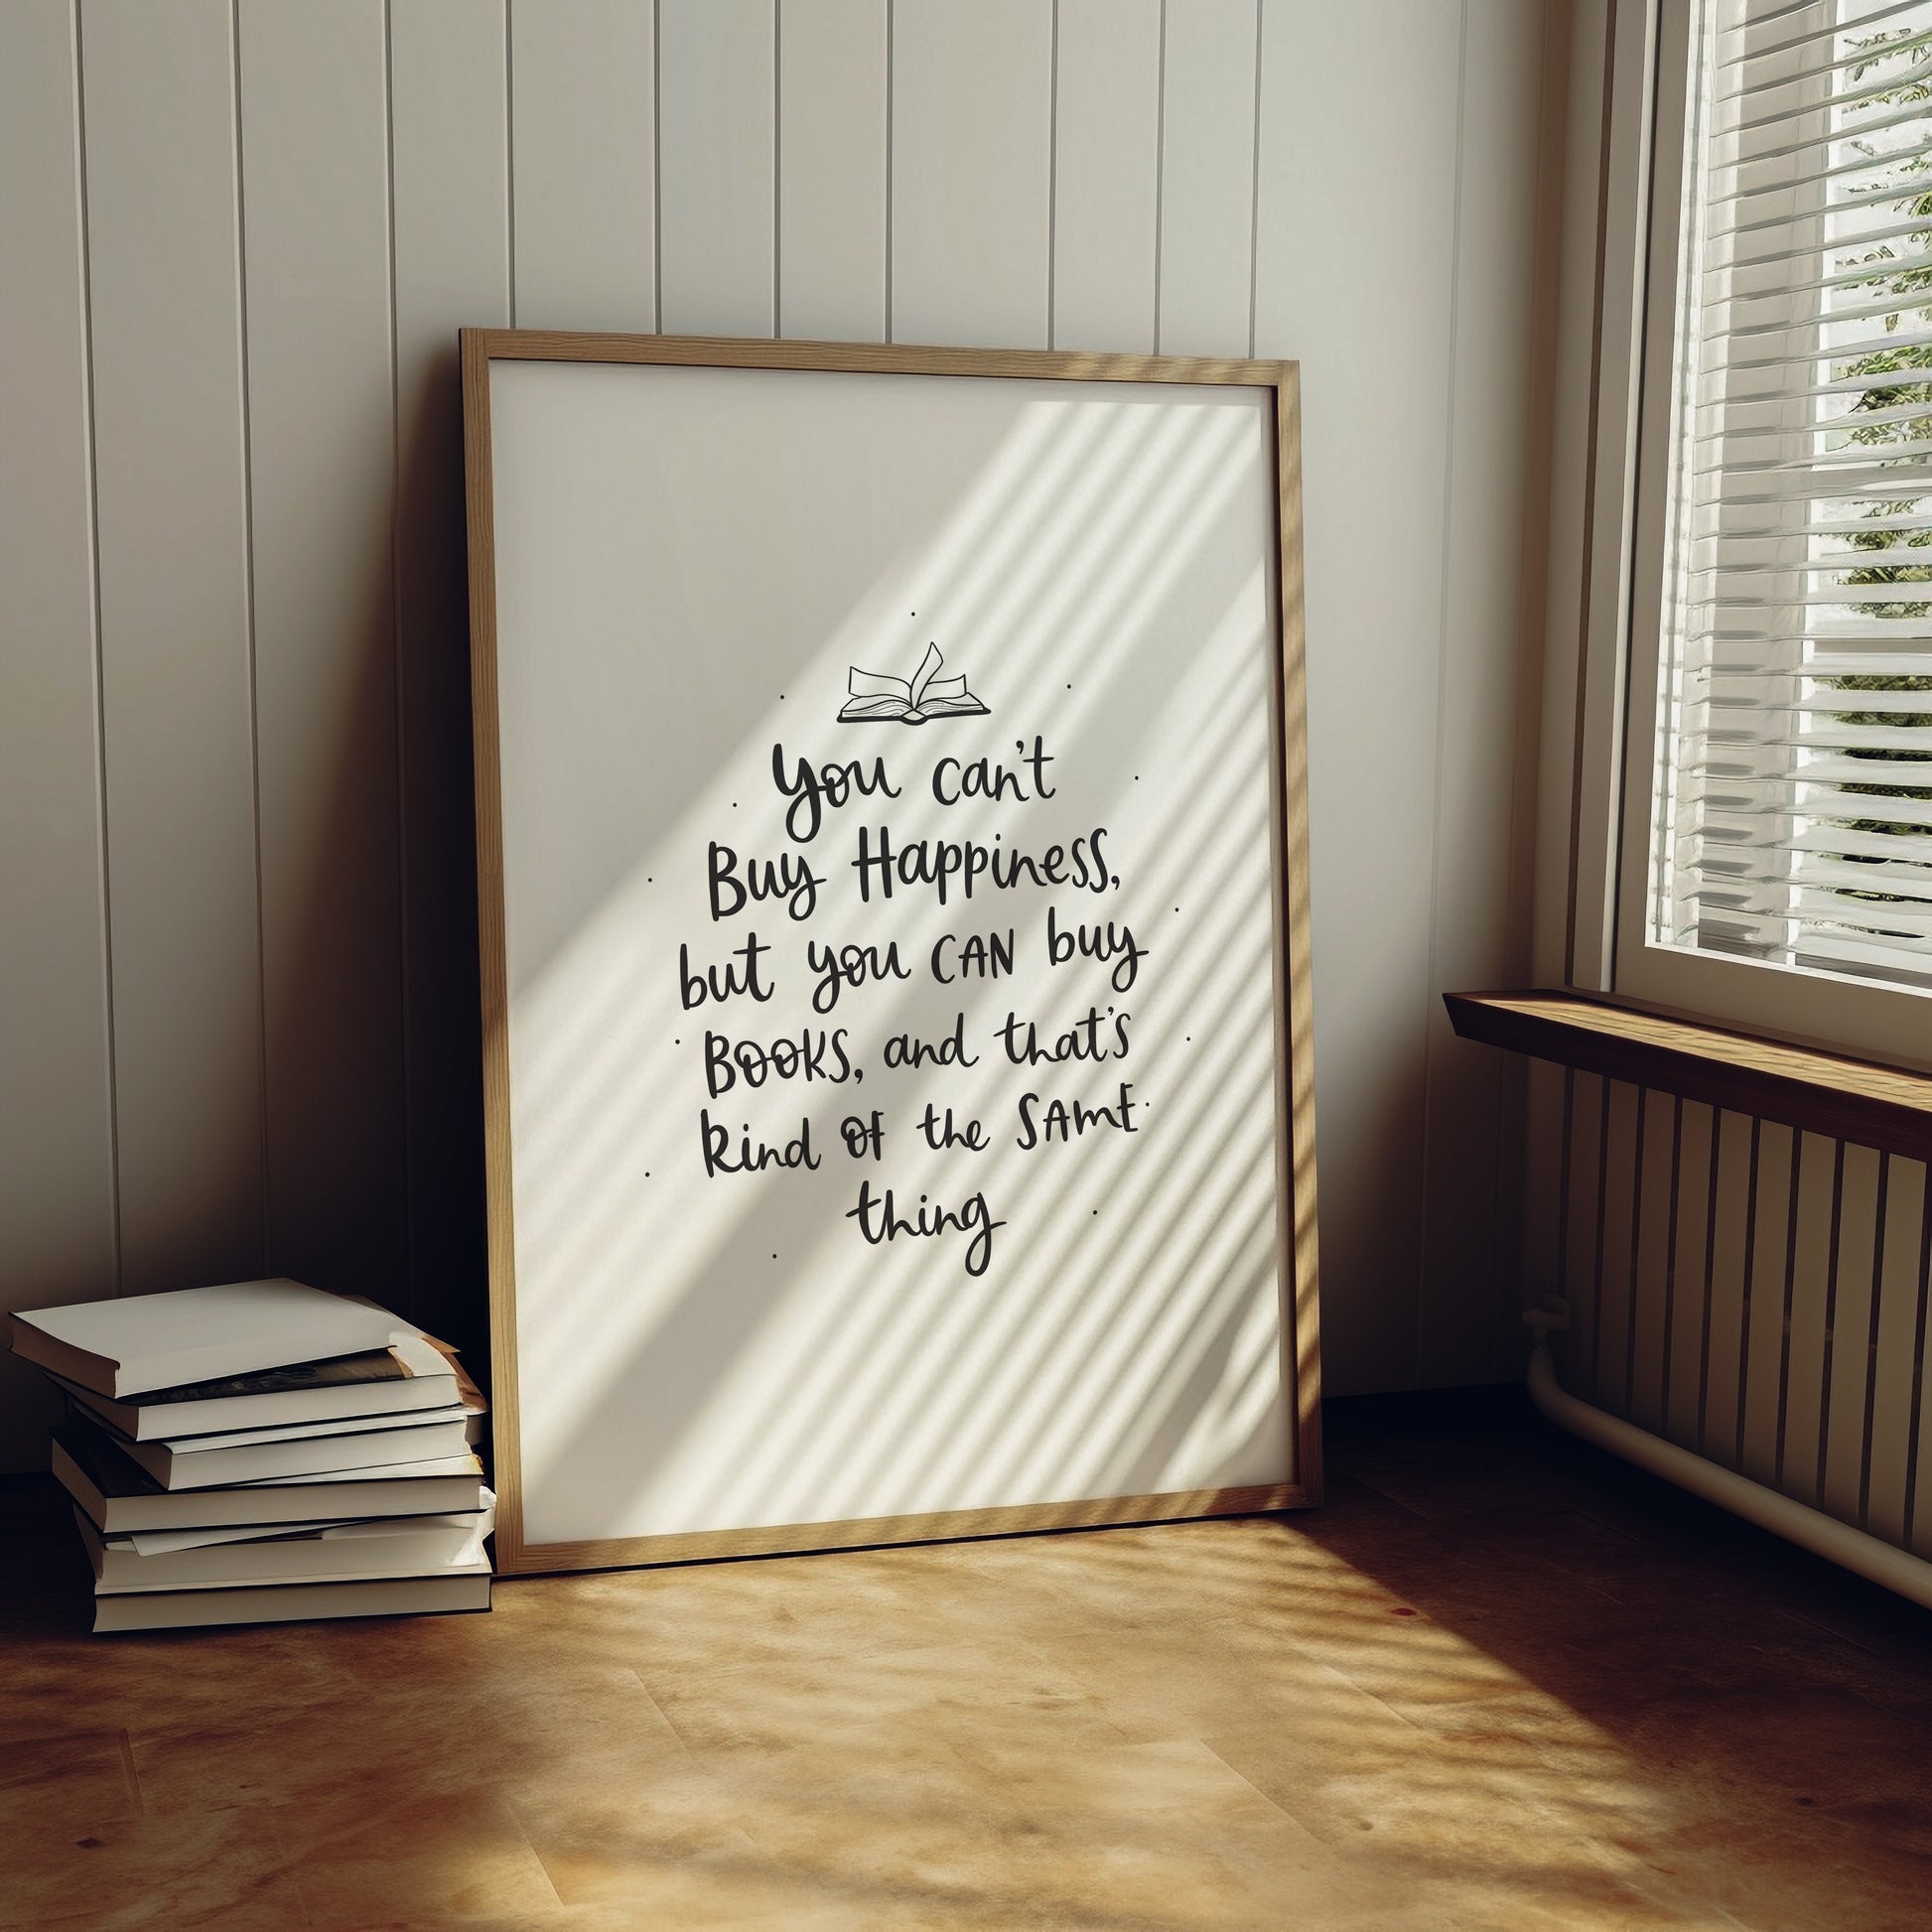 You can't buy happiness, but you can buy books bookish print by Abbie Imagine